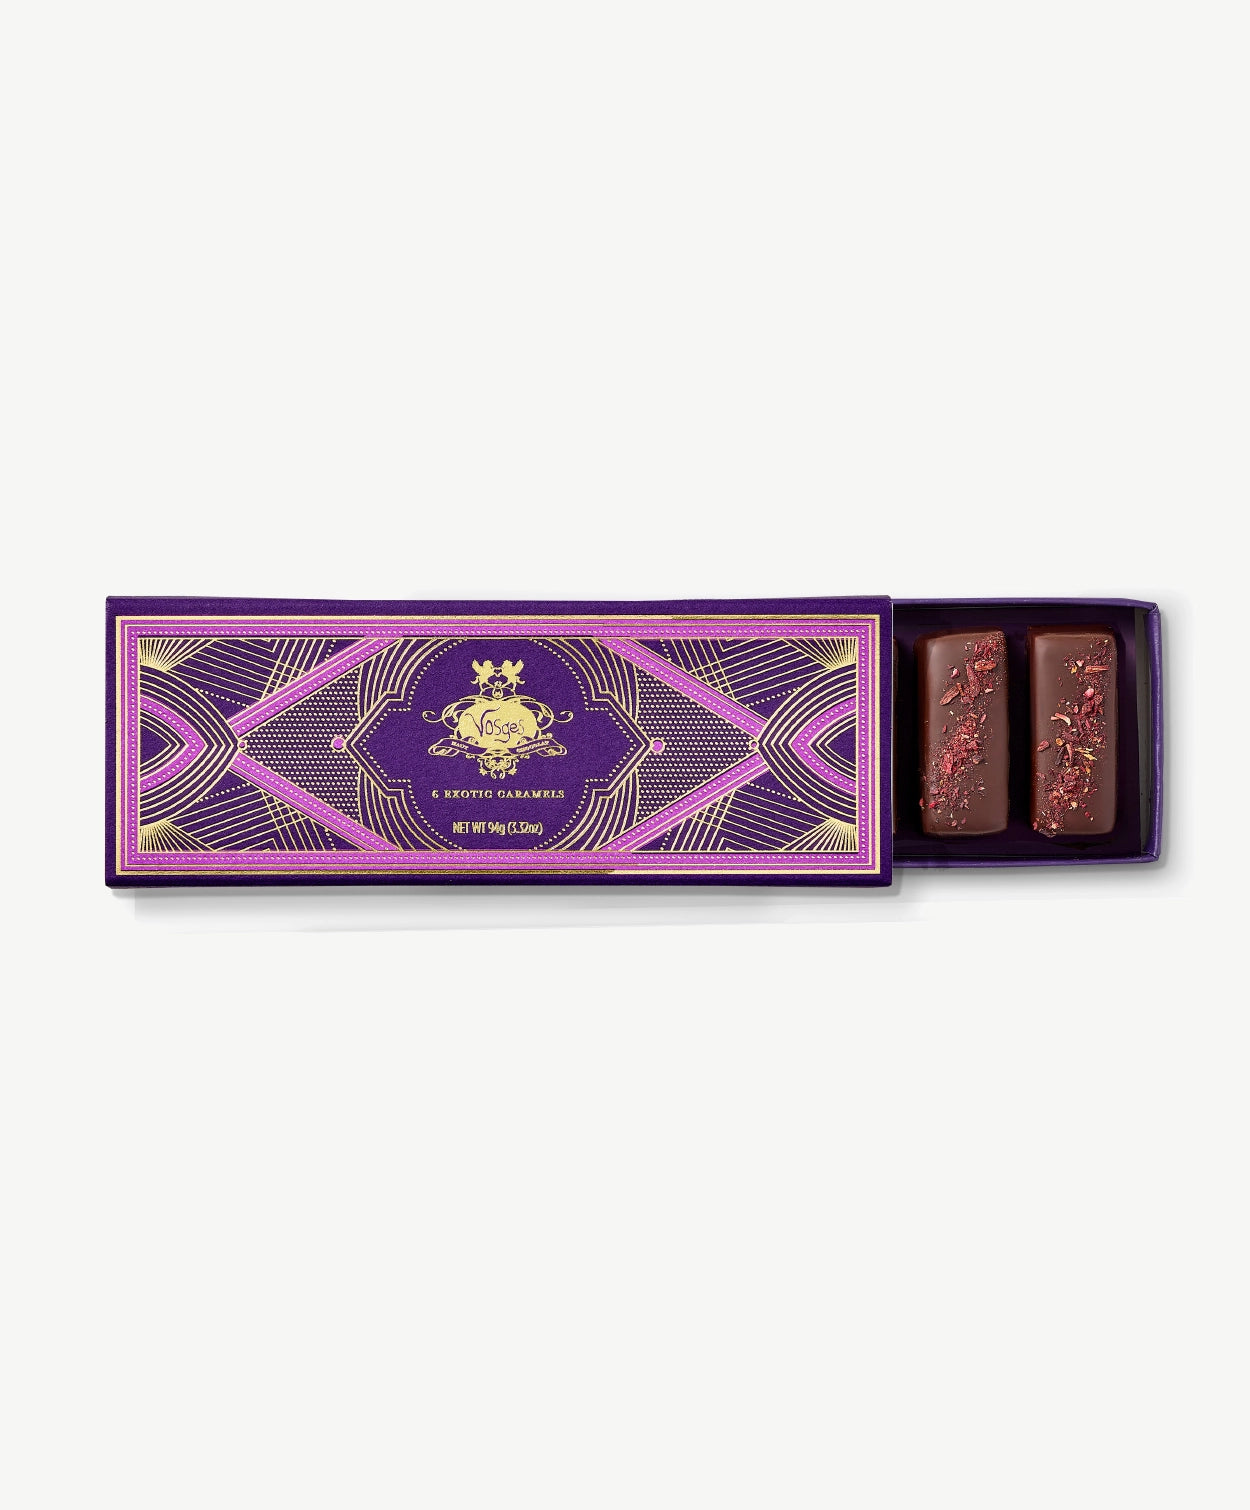 Purple Vosges chocolate box opened revealing two chocolate covered caramels adorned with hibiscus flowers on a grey background.